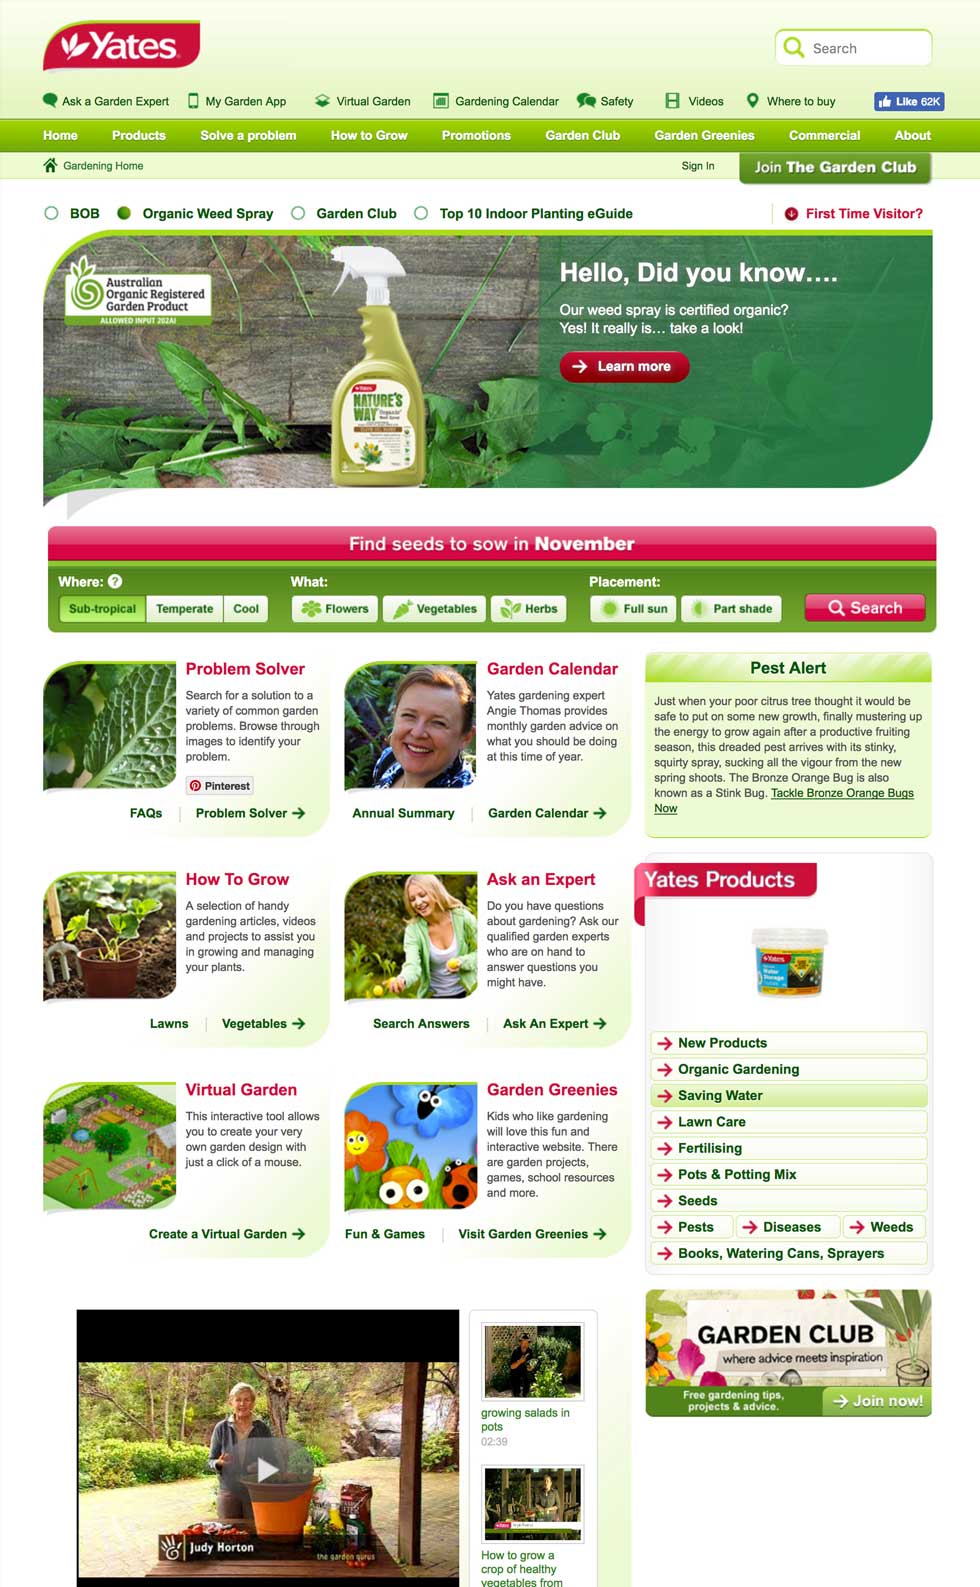 Blossoming with Yates: Our Web Development for a Leading Garden Care Brand desktop layout